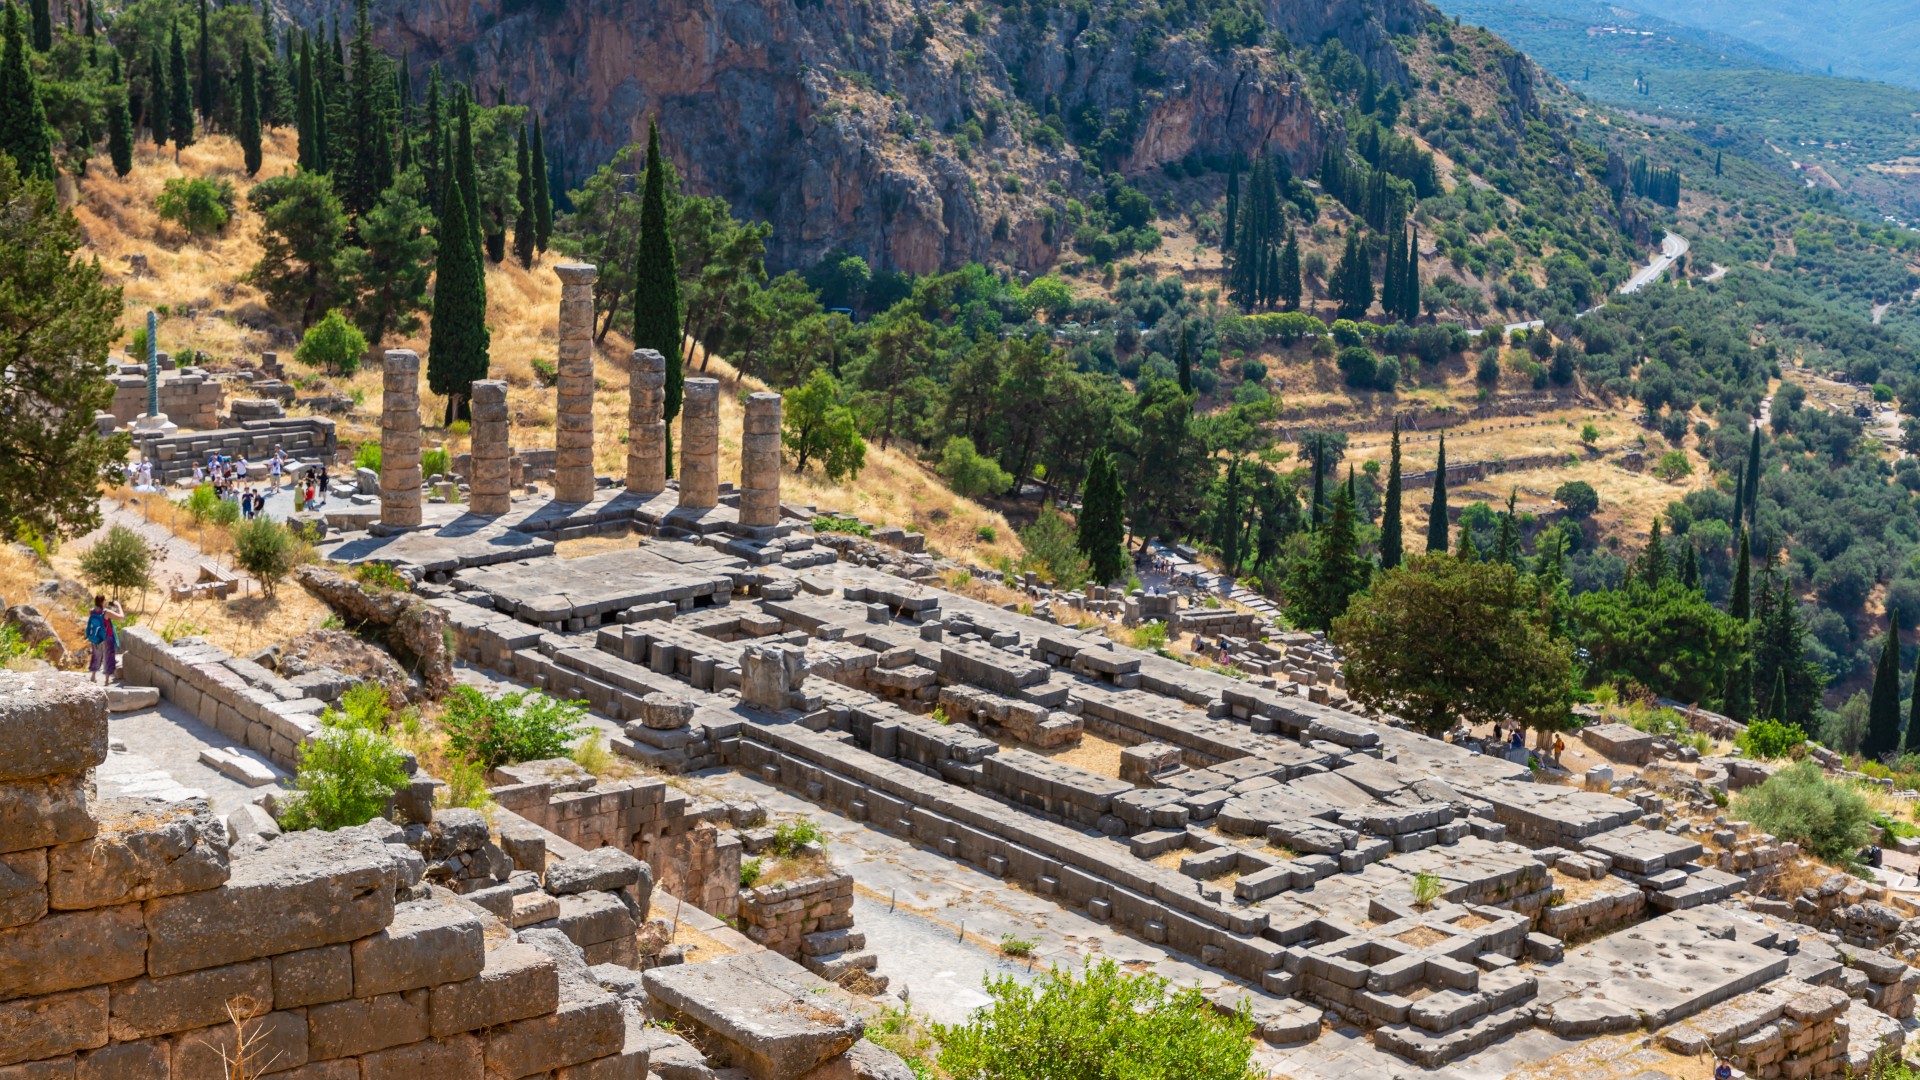 Apollo Temple in Delphi archaeological site at the Mount Parnassus. Delphi is famous by the oracle at the sanctuary dedicated to Apollo.